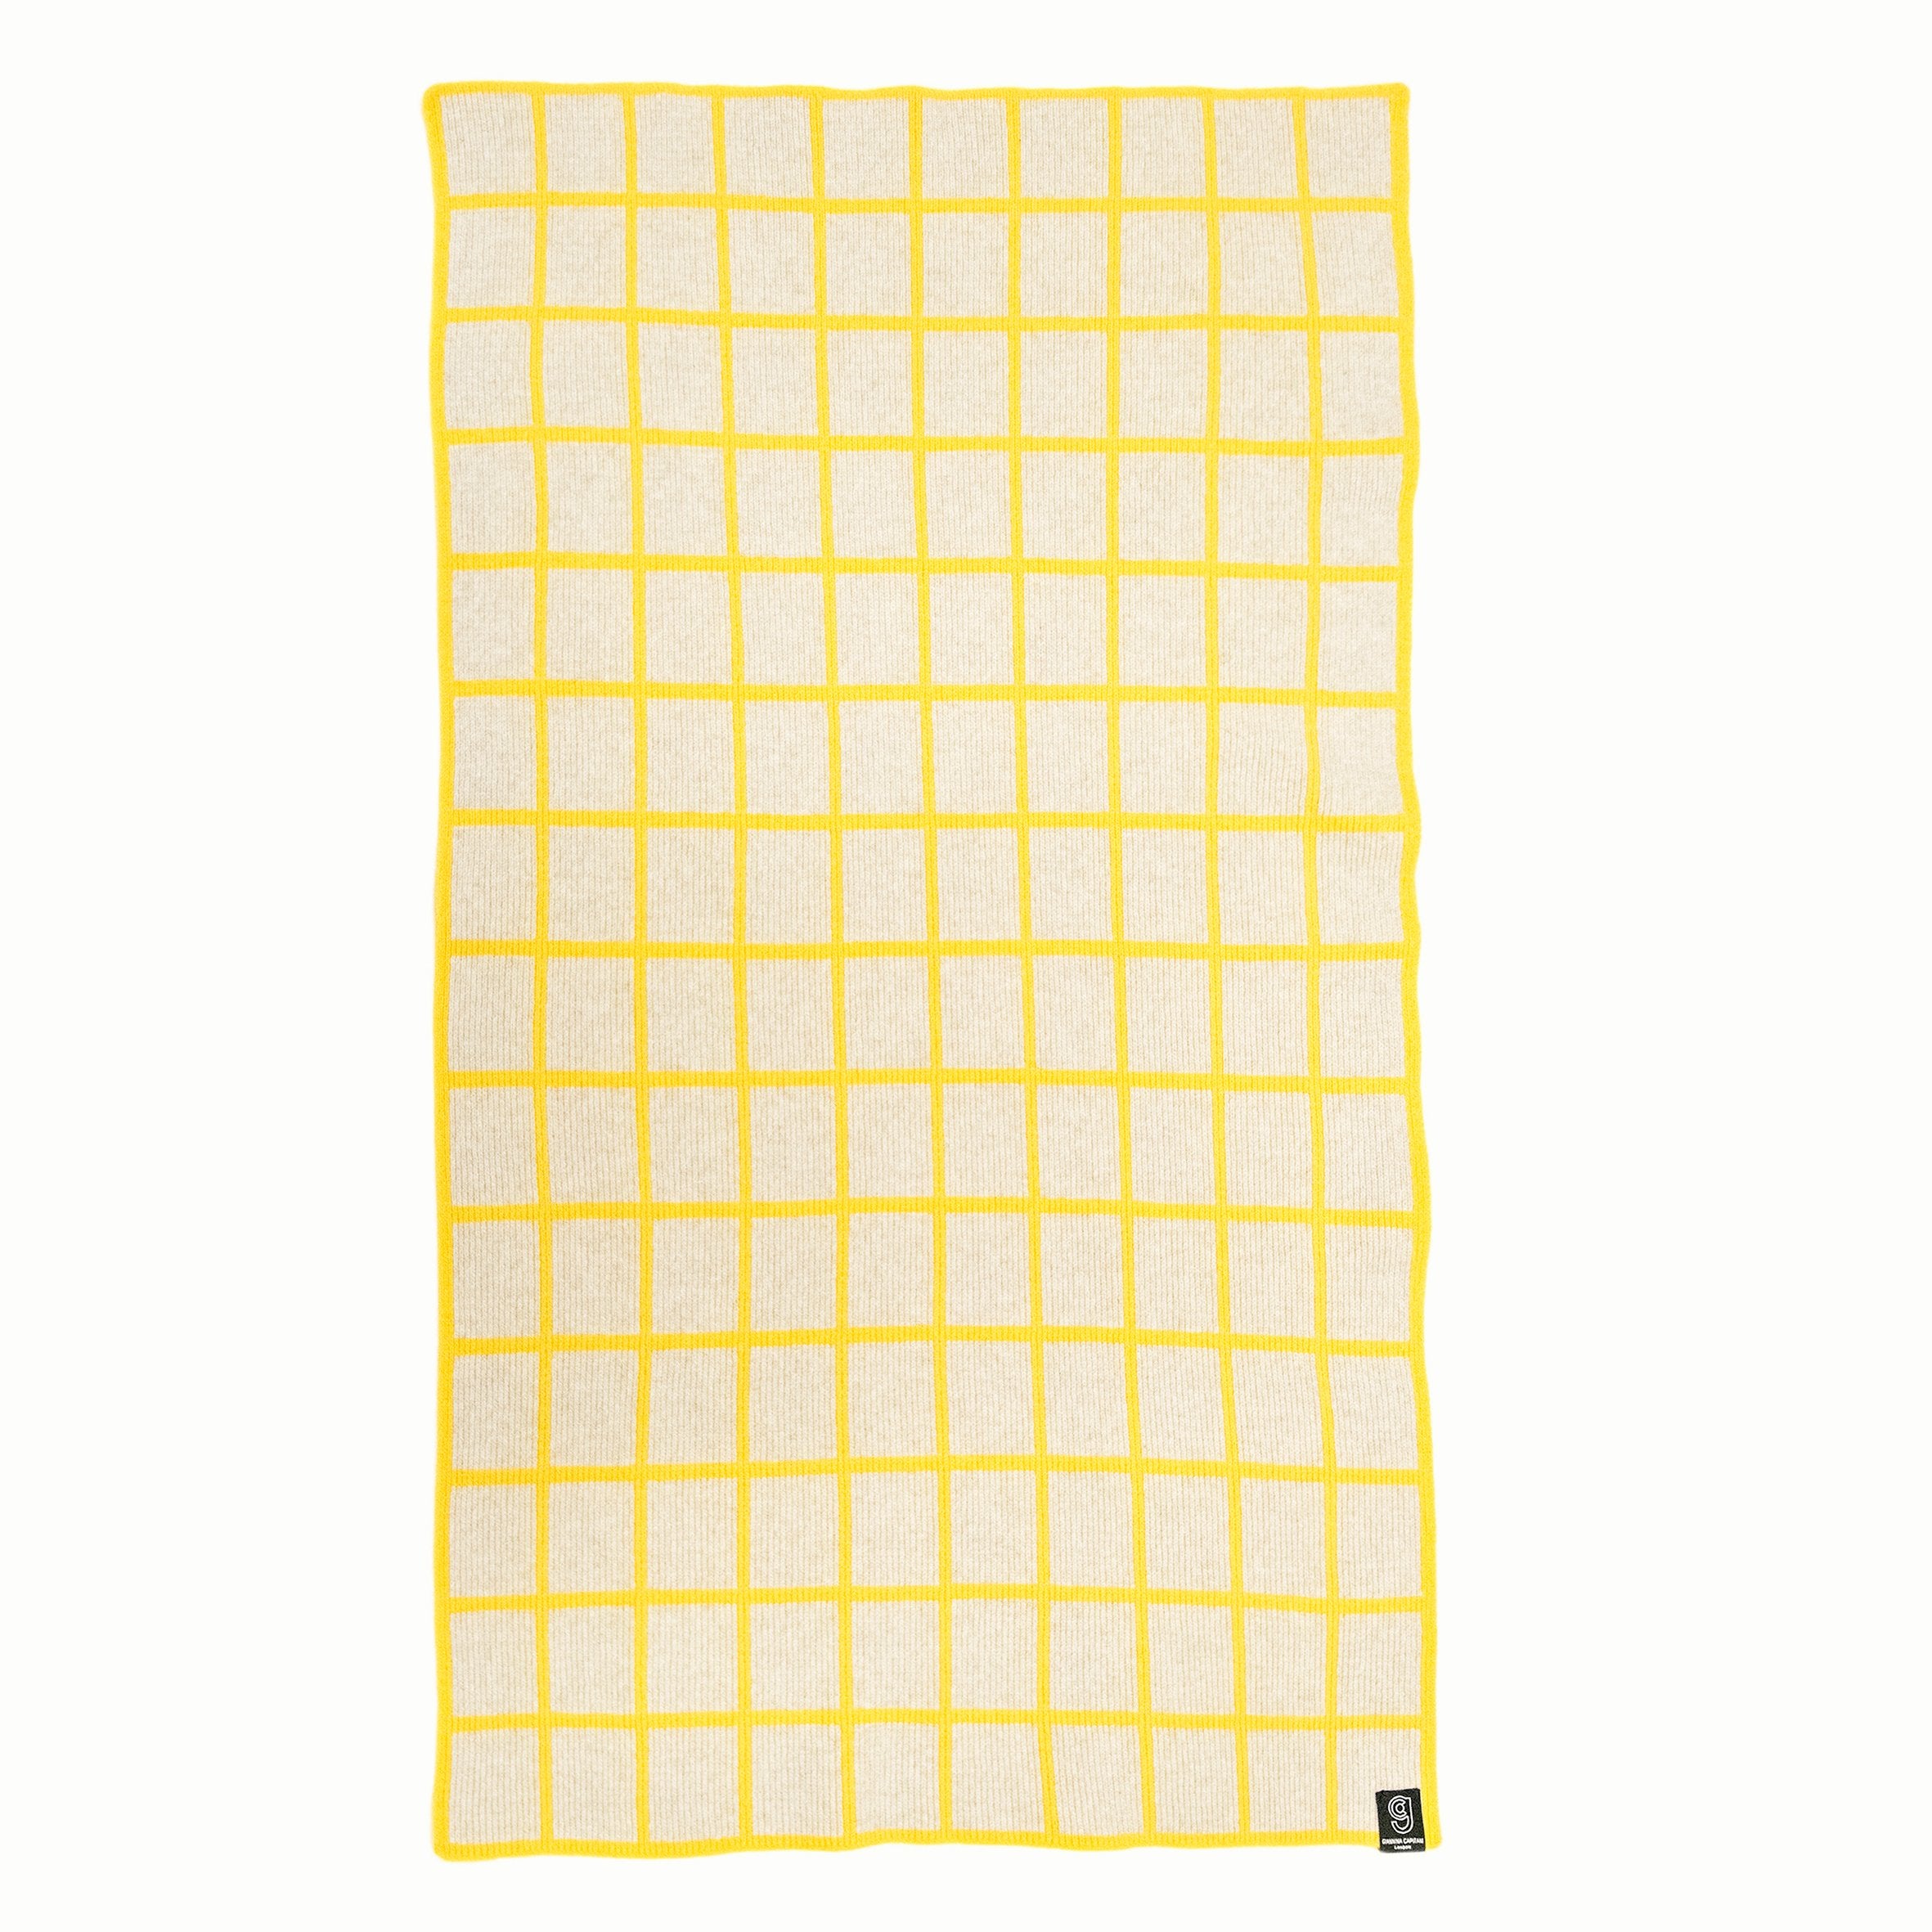 GRID BLANKET IN GREY AND YELLOW